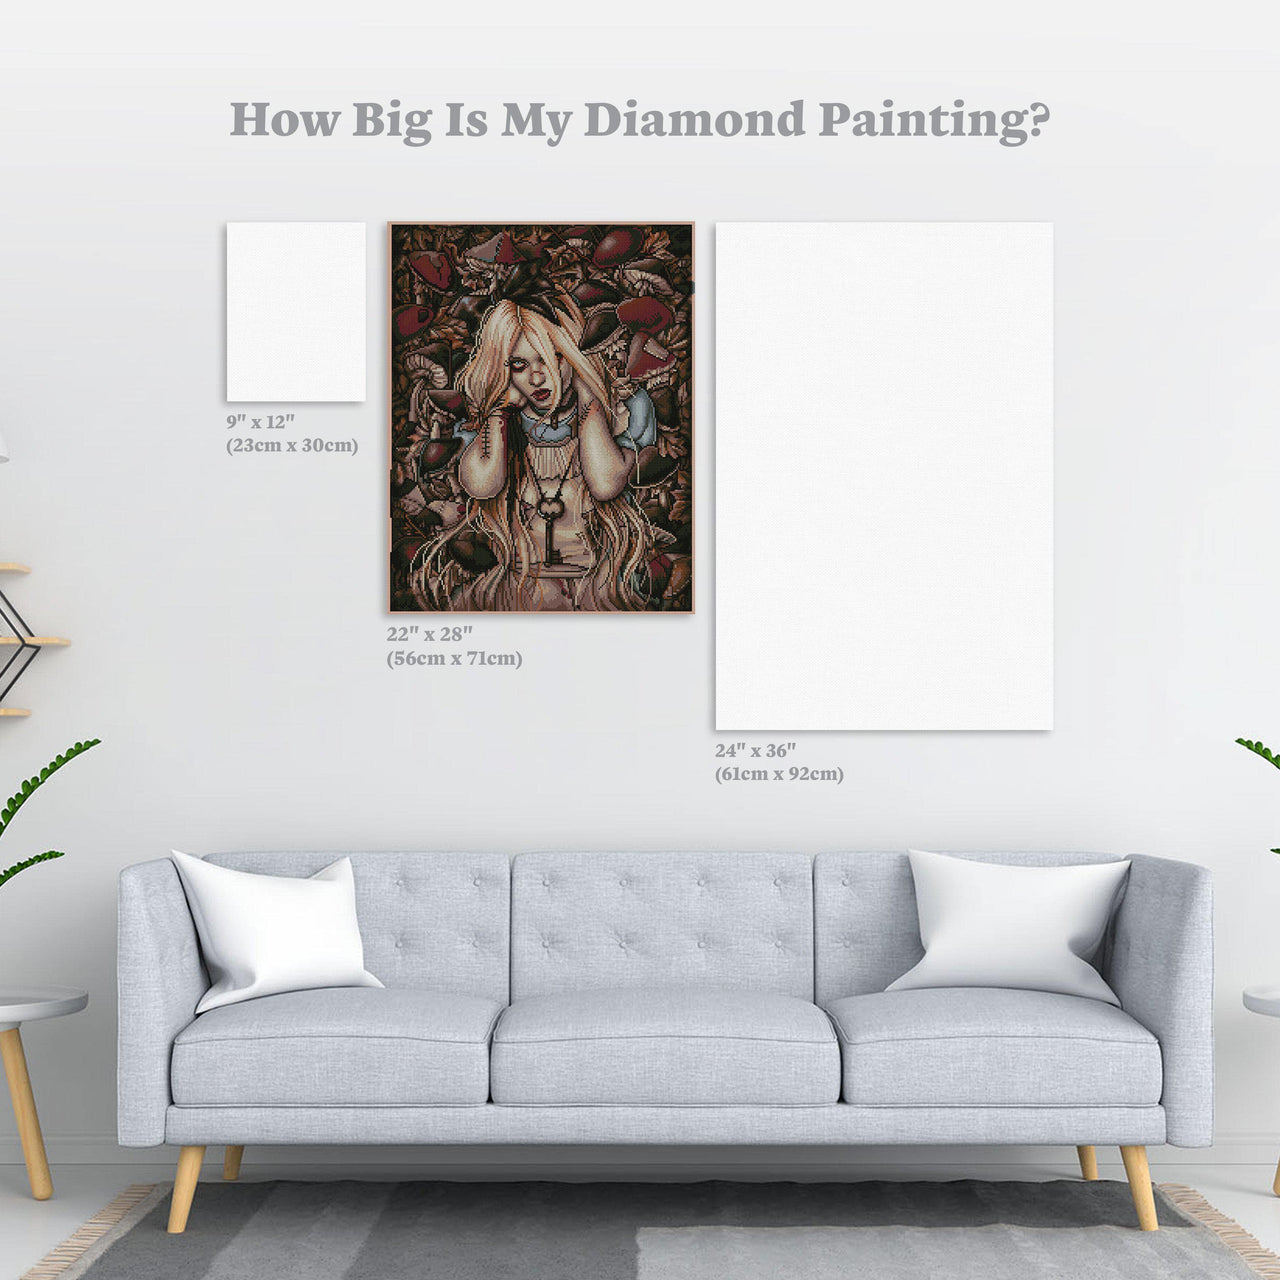 Diamond Painting Not Your Alice 22" x 28″ (56cm x 71cm) / Round with 34 Colors including 1 AB / 30,446